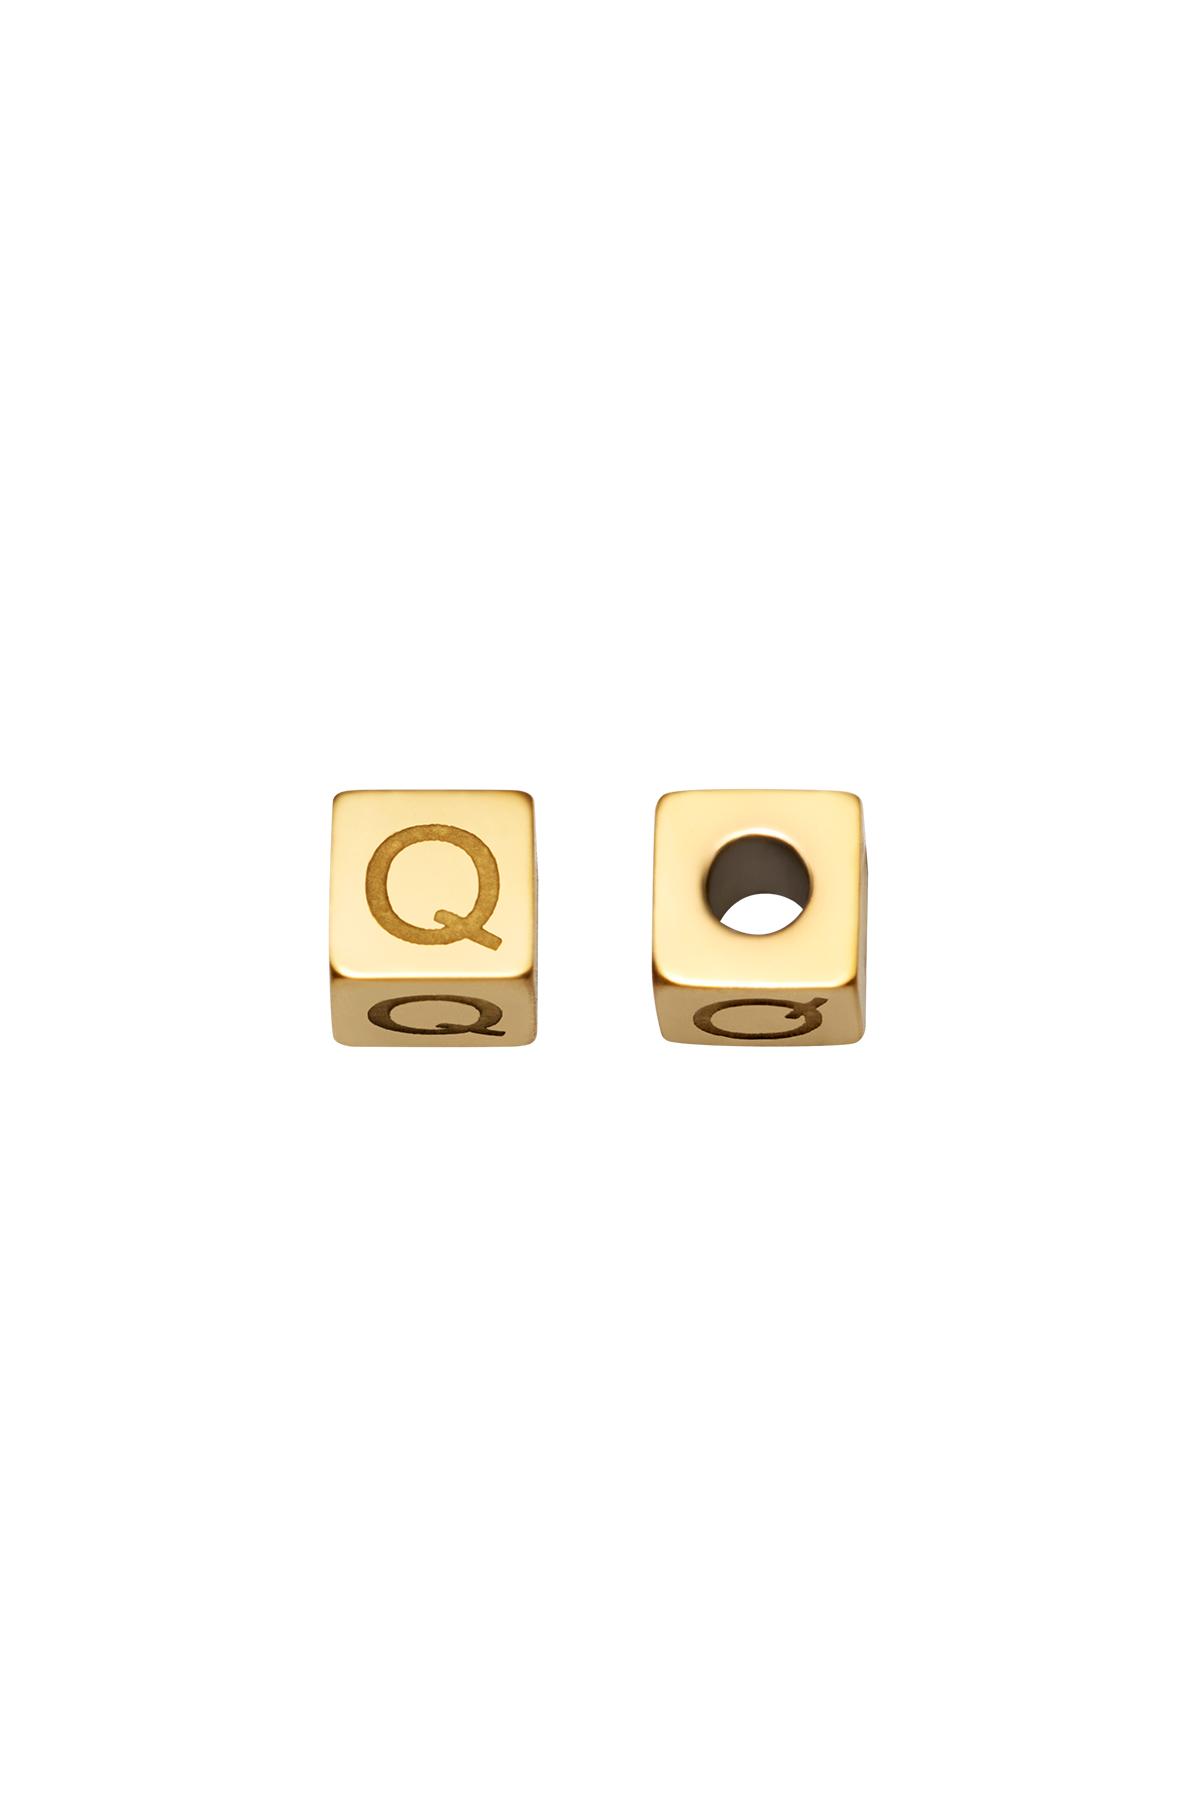 Gold / DIY Beads Alphabet Gold Q Stainless Steel Picture9